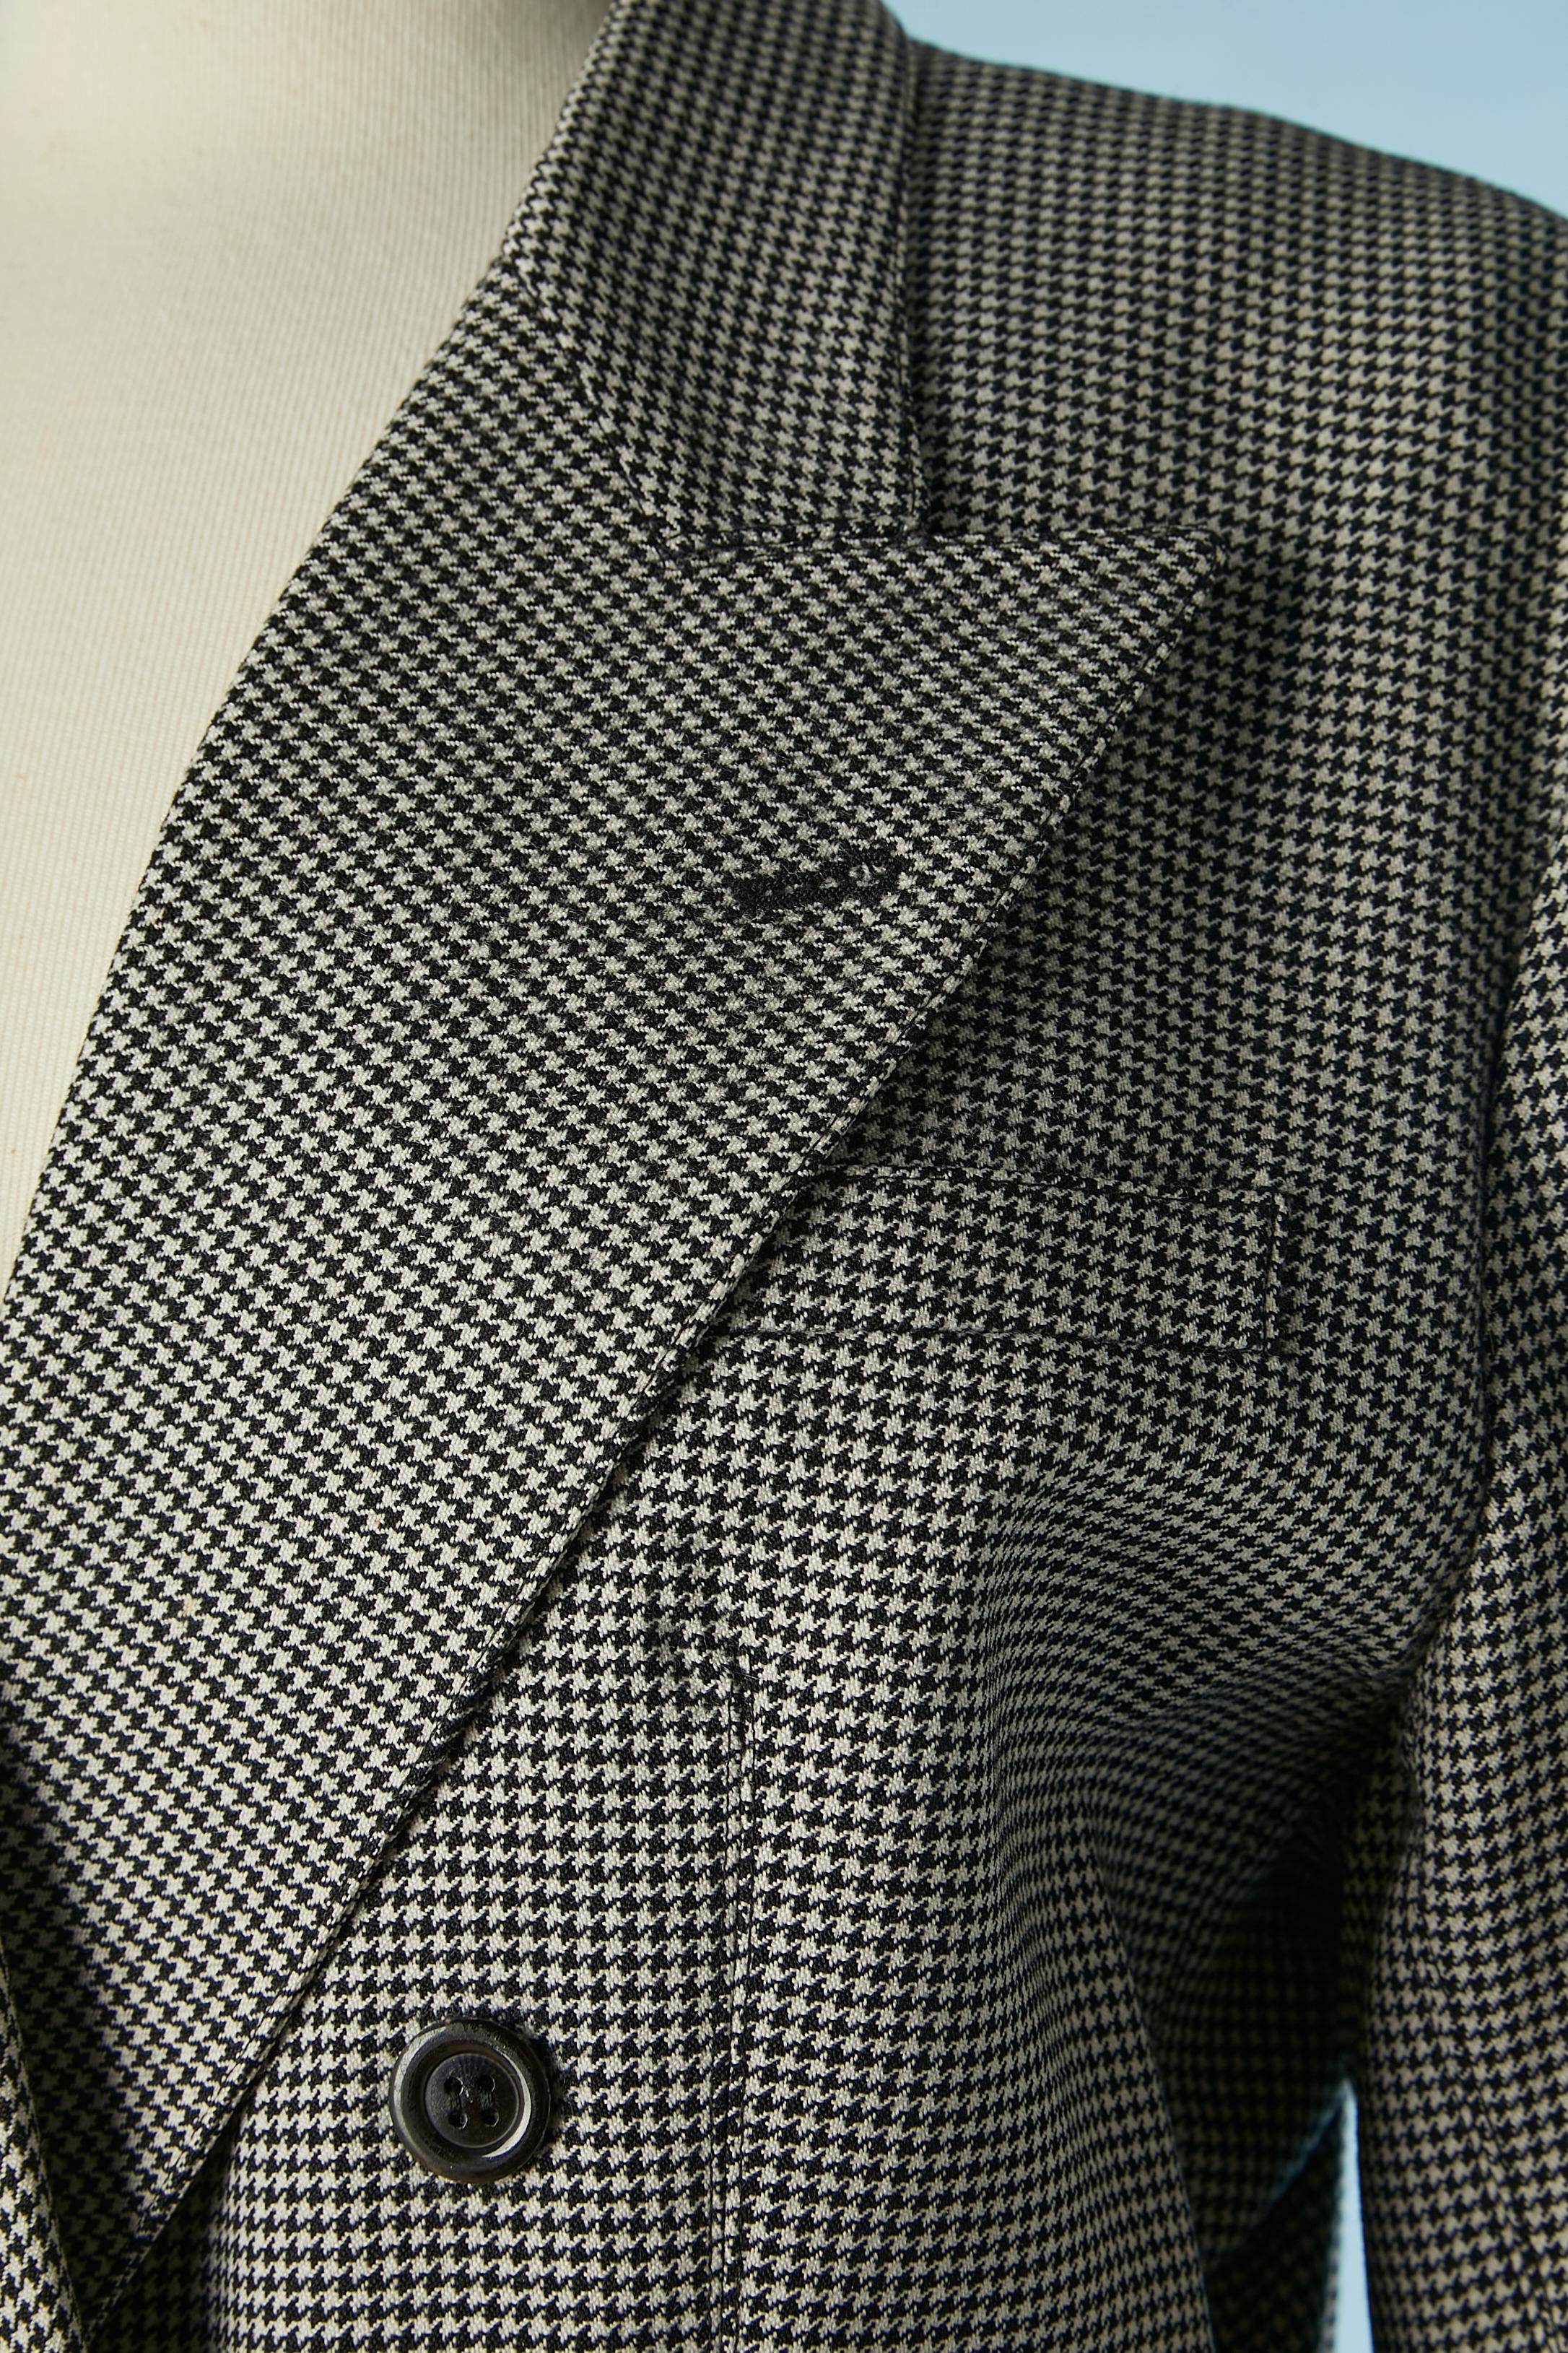 Double-breasted Pied de poule pattern blazer. No fabric tag but main fabric is wool and rayon lining. 
SIZE M 